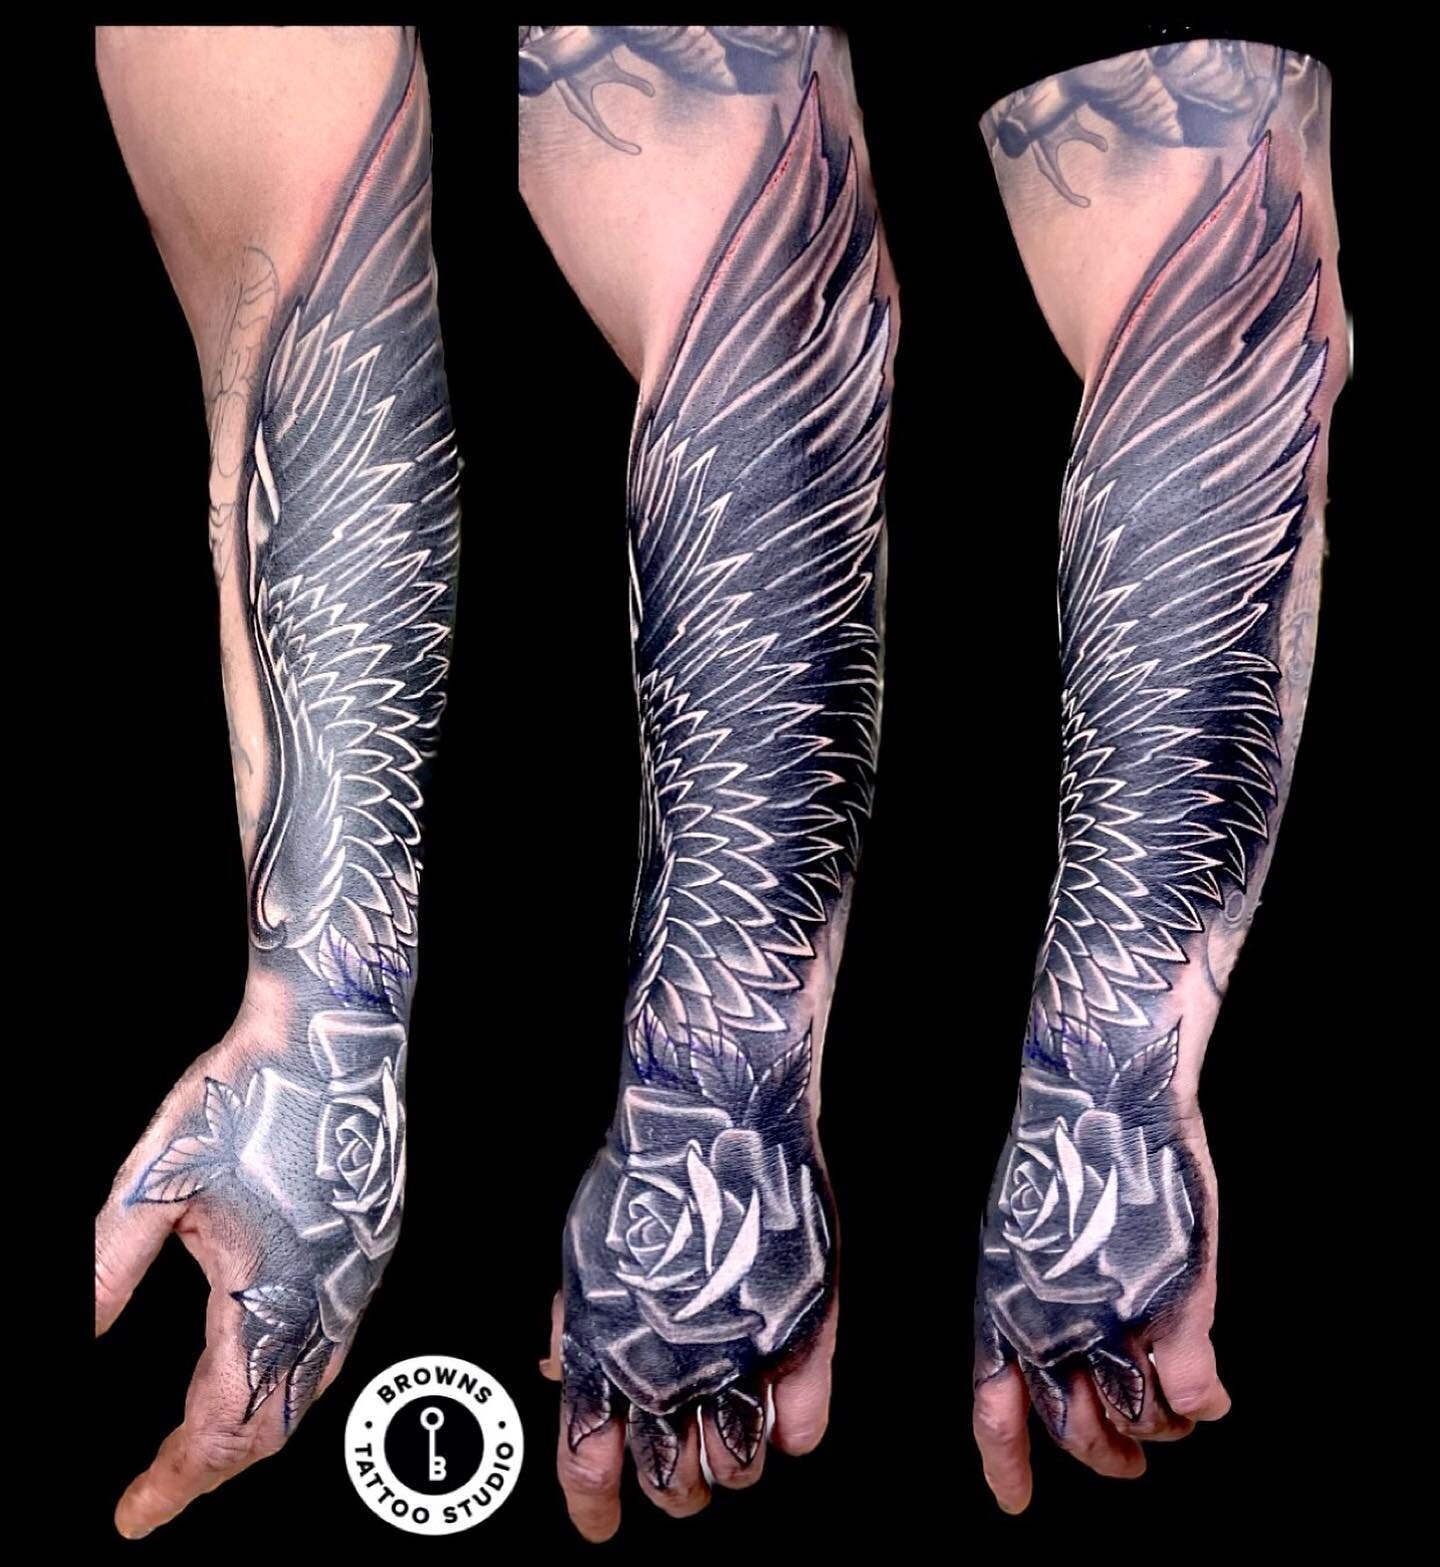 Cover up today, swipe across to see the before 

#coverup #coveruptattoo #blackwork #blackworktattoos #blackandgreytattoo #rose #rosetattoo #wing #wingtattoo #roseandwingtattoo #brownstattoos #brownstattoostudio #haslandtattoos #masttattoopen #ghostc